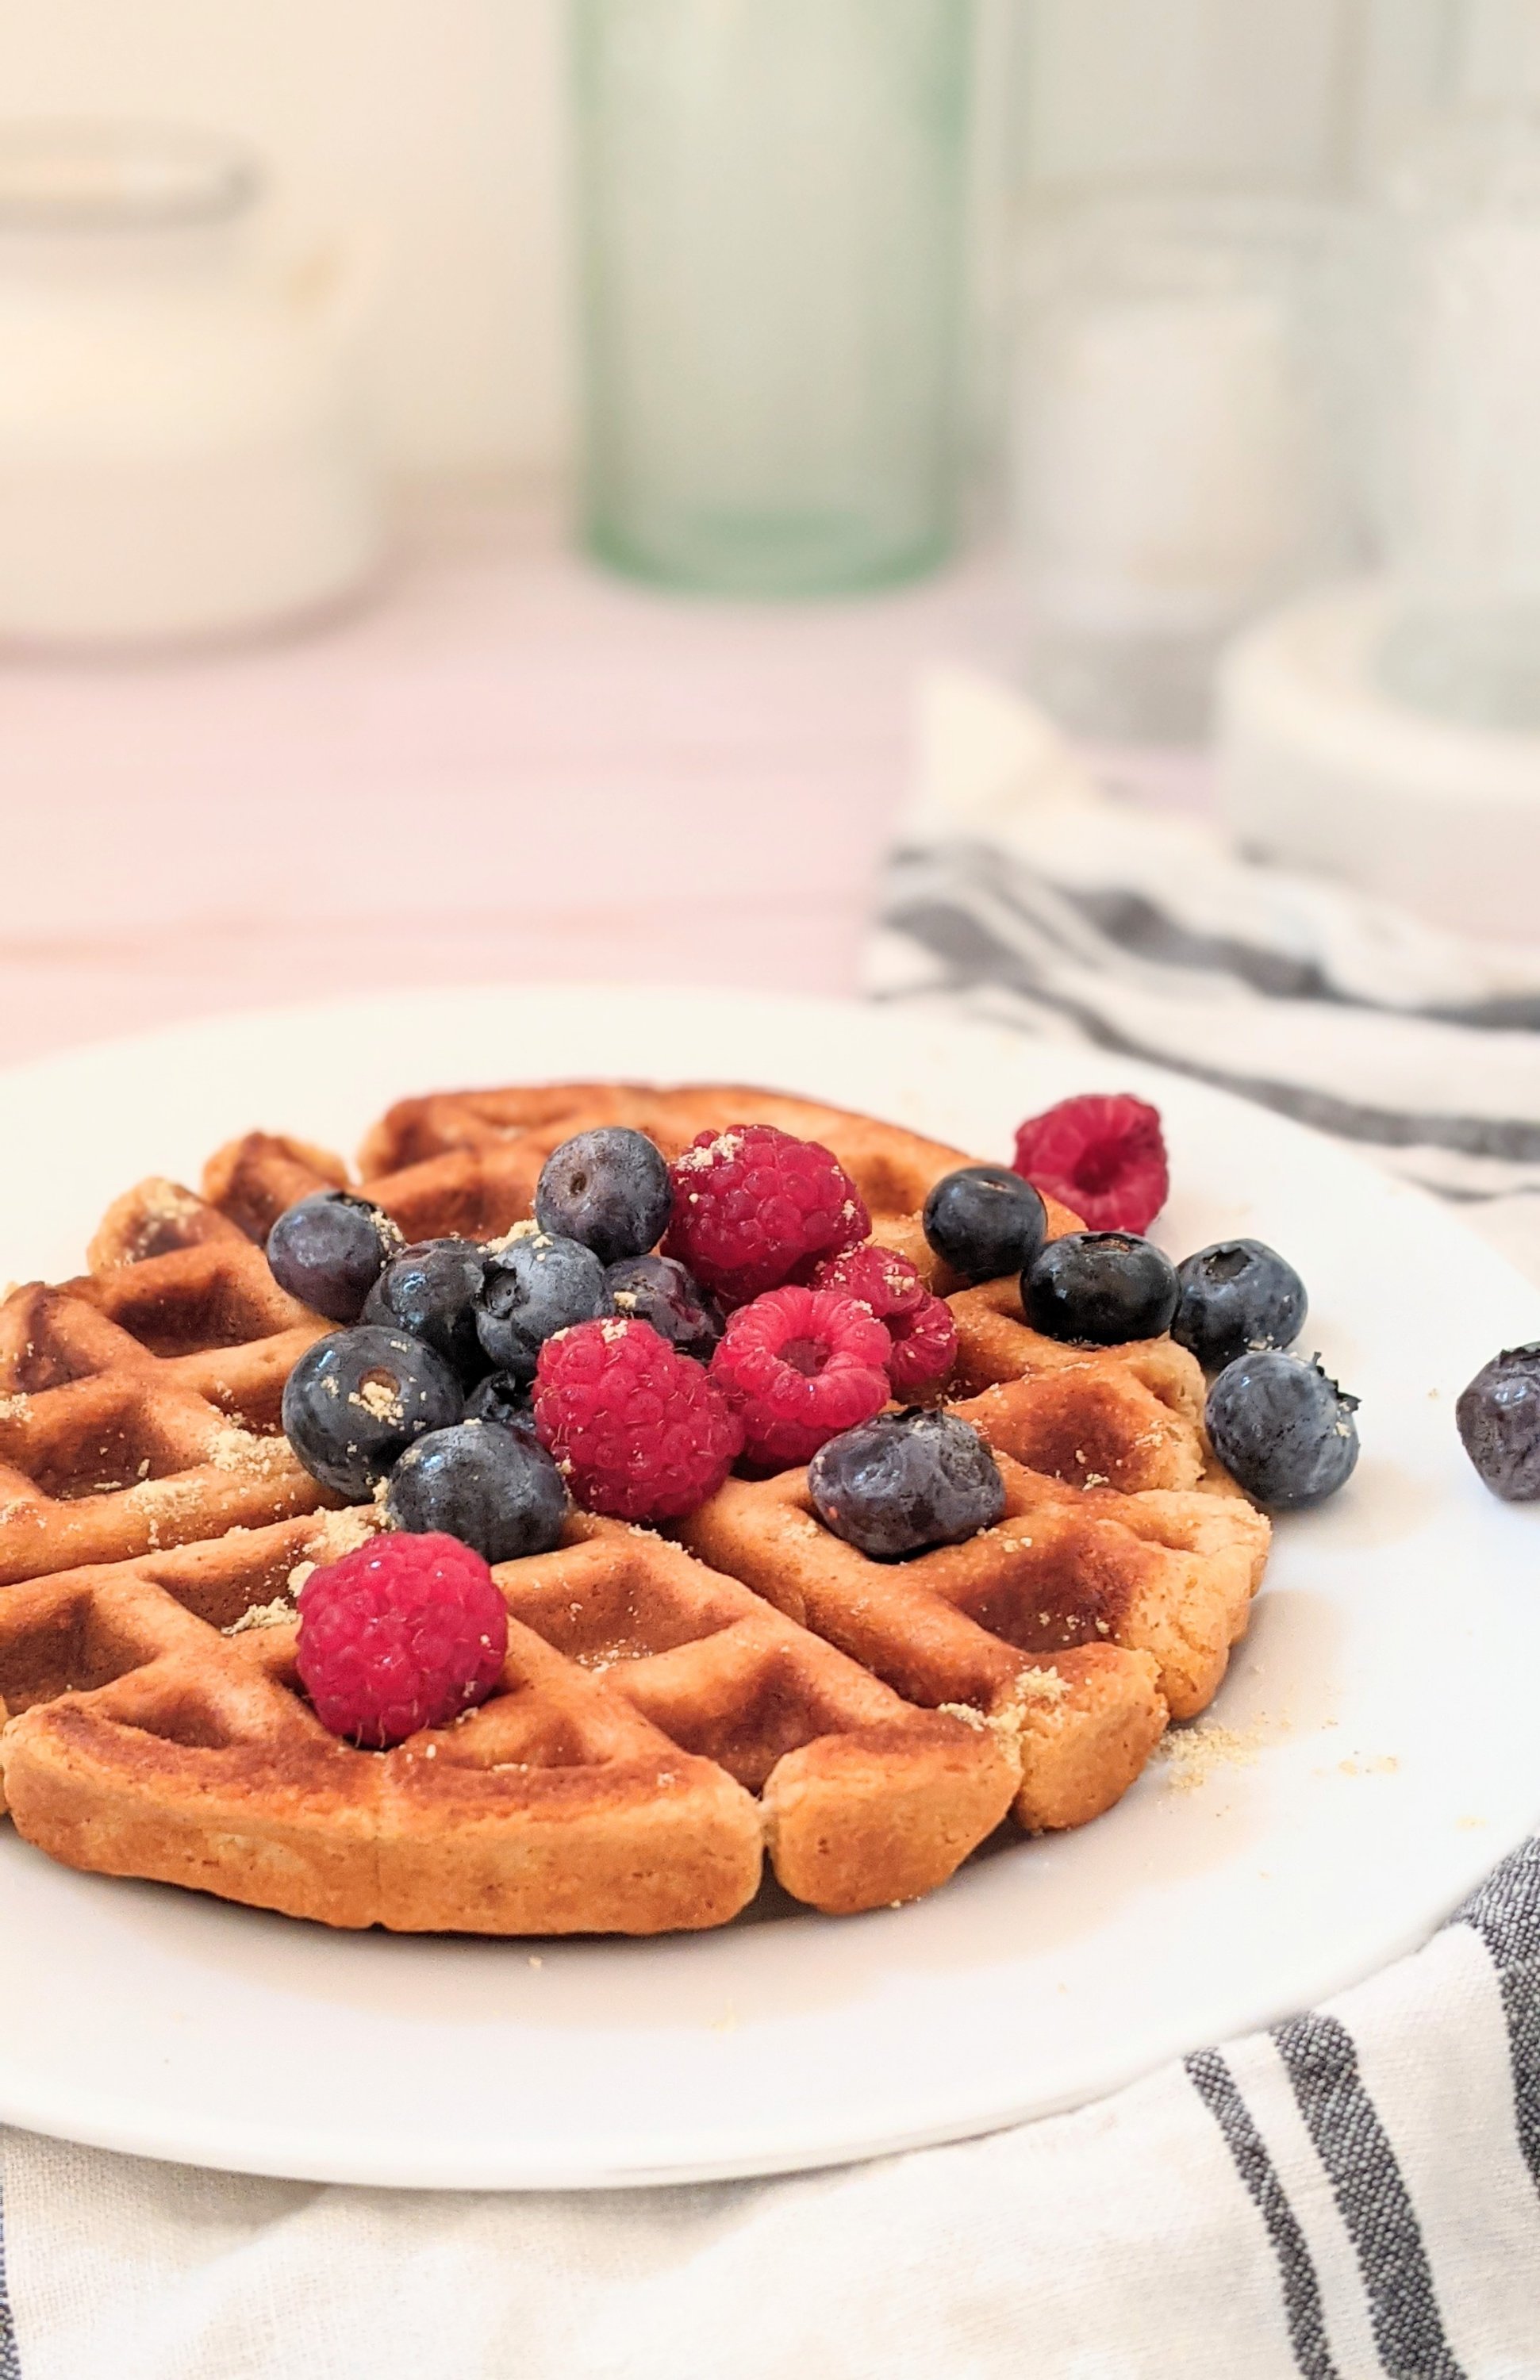 belgian waffles without yeast recipe vegan waffles for brunch dairy free recipes to bring to a bruch or breakfast vegan recipe ideas for plant based brunches